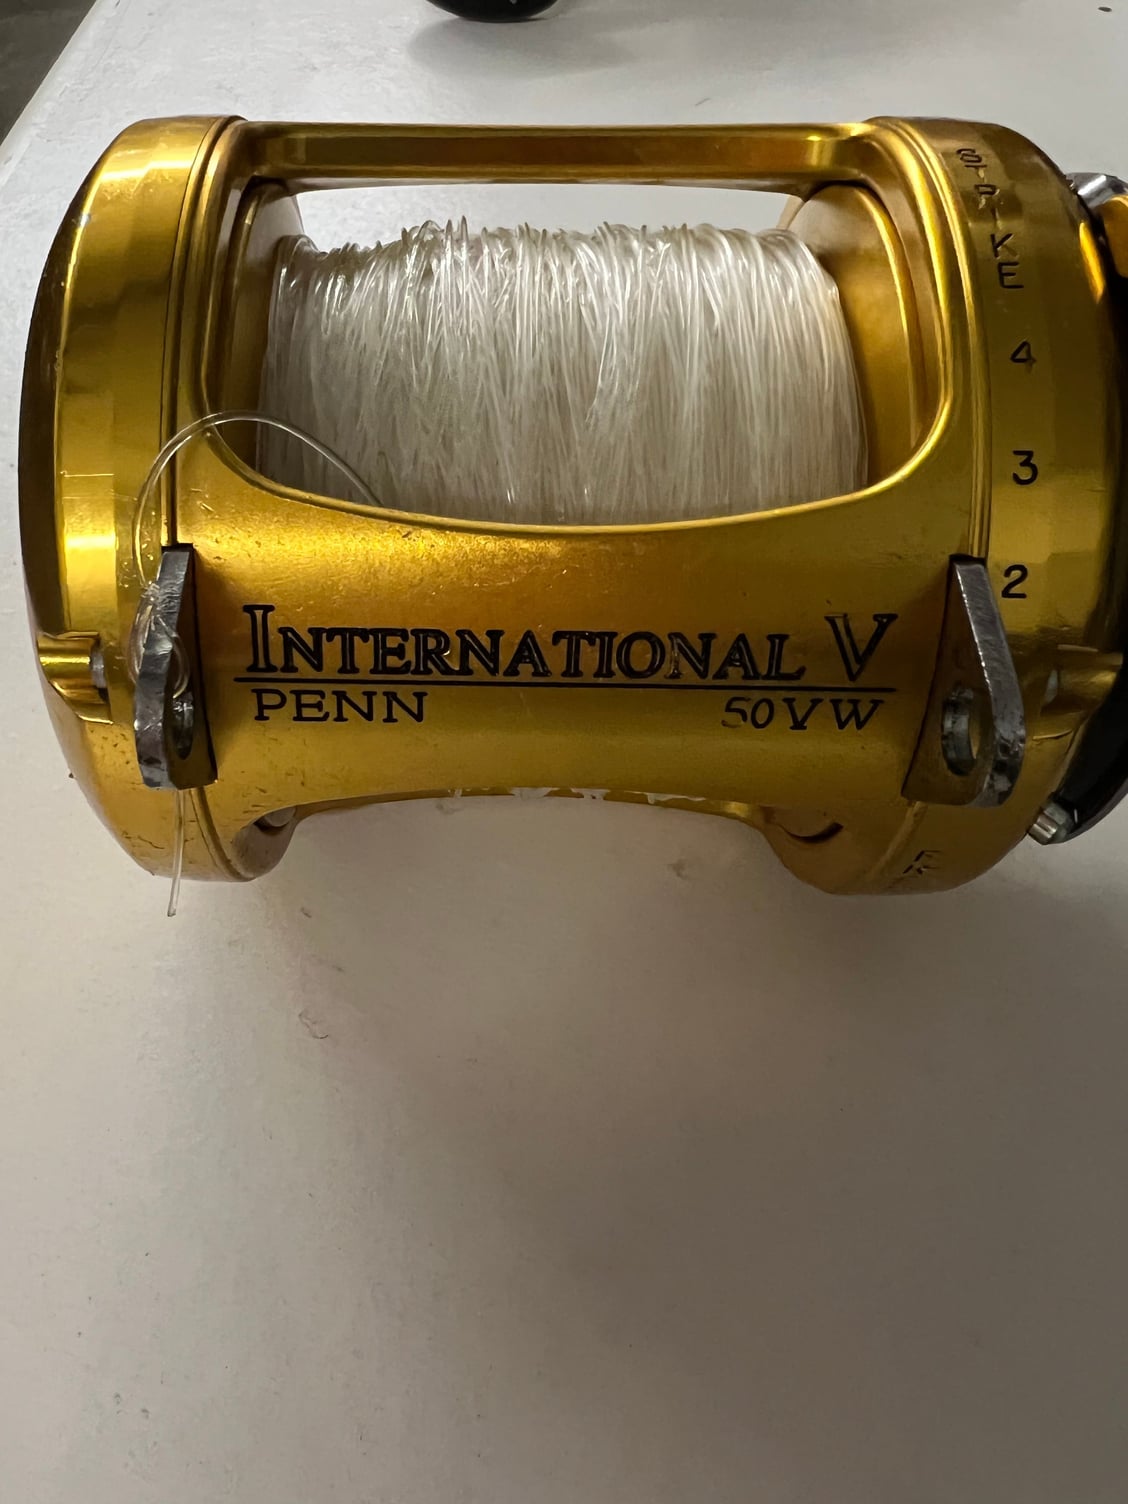 Penn 50VW $450.00 - The Hull Truth - Boating and Fishing Forum